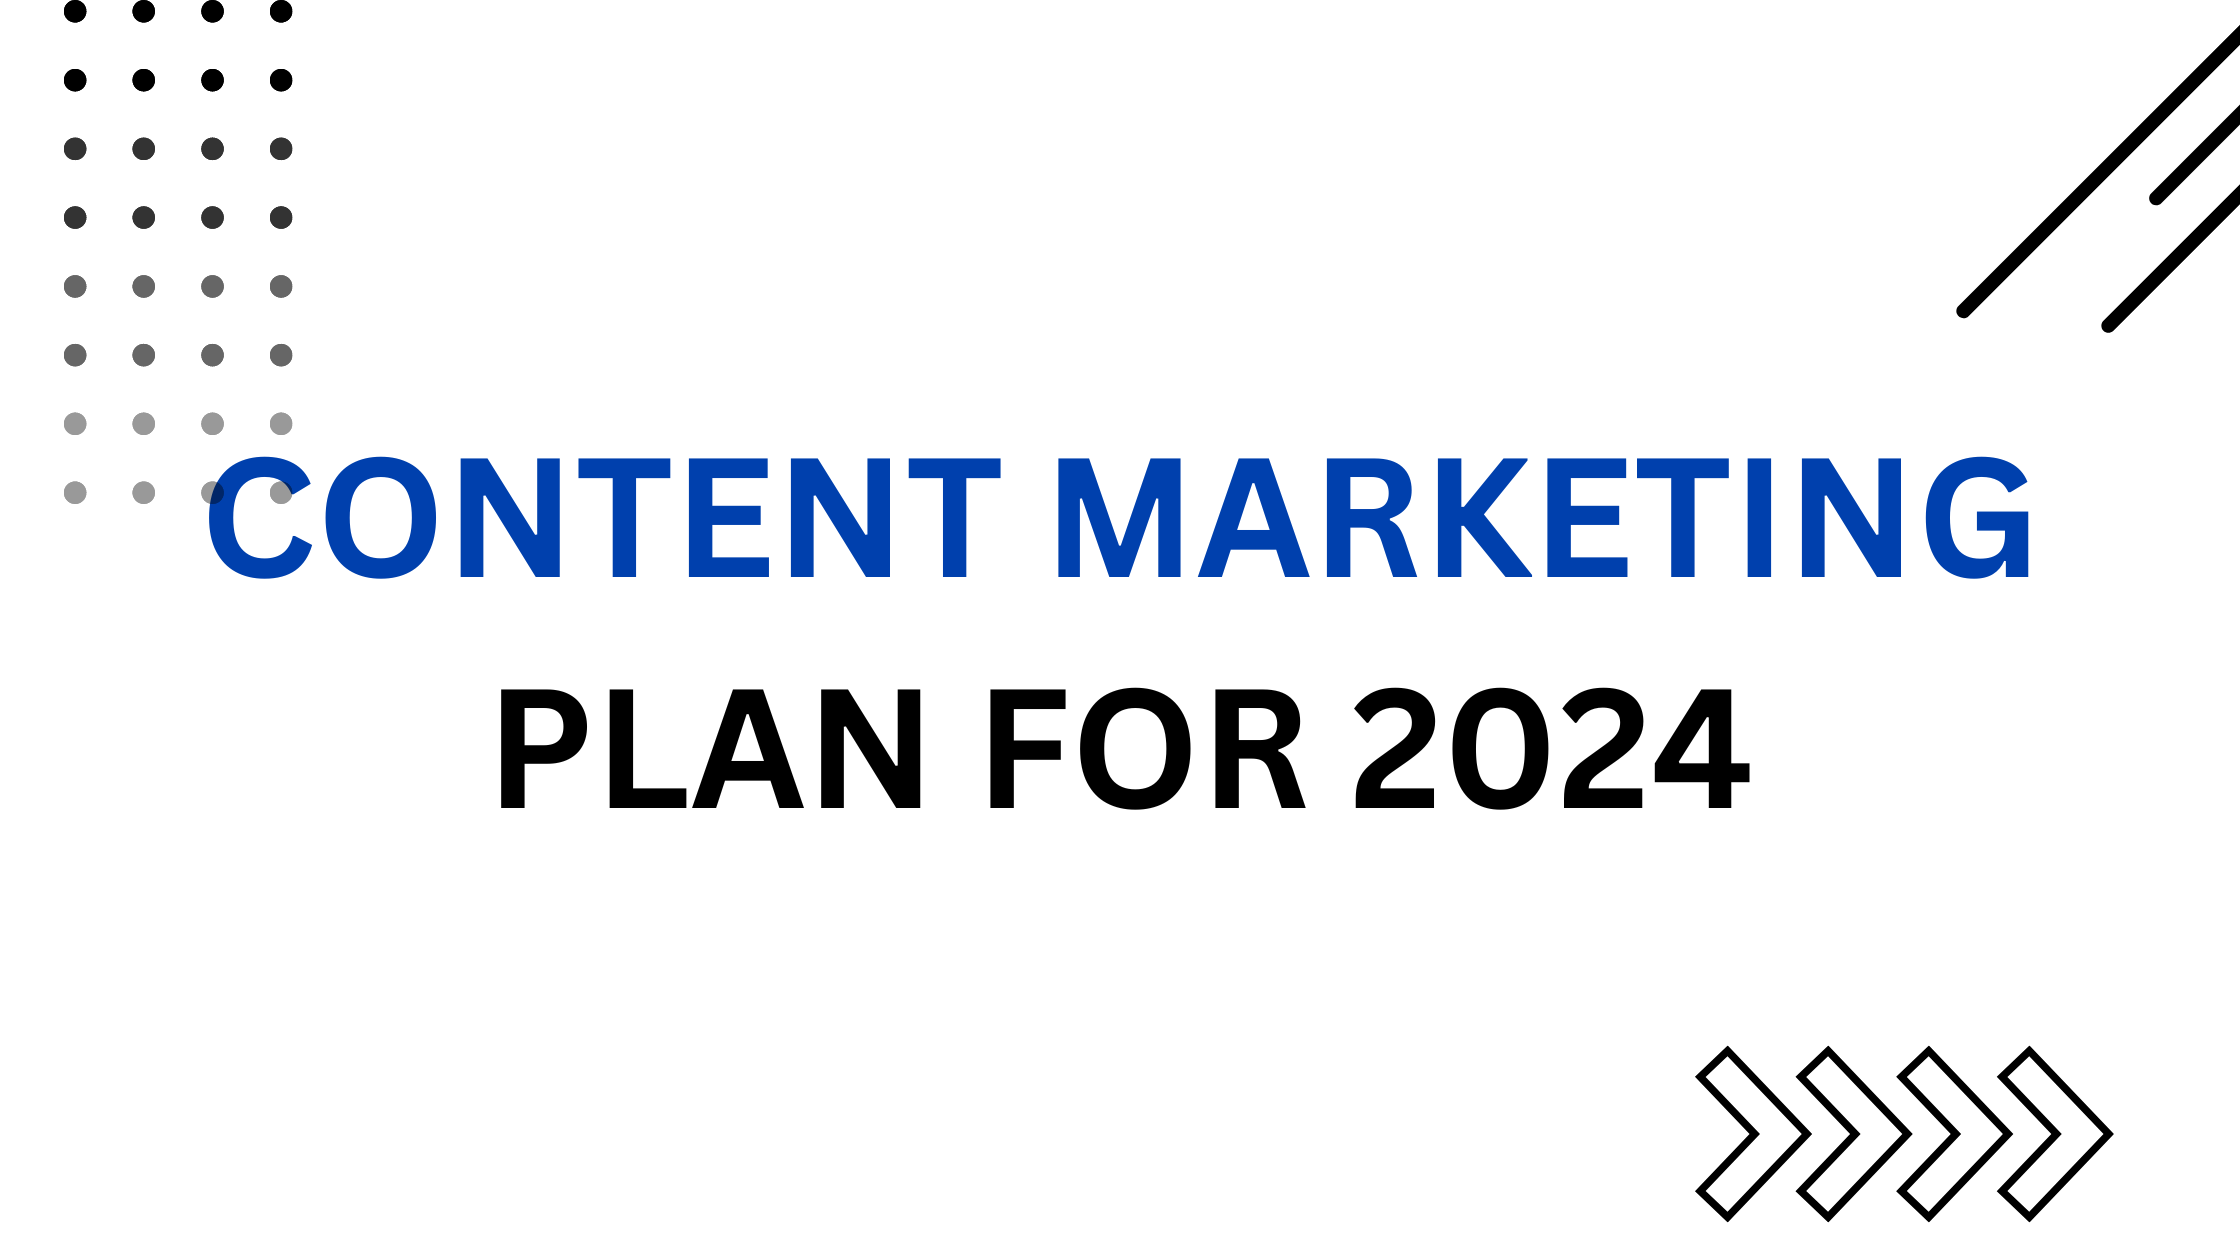 Content Marketing Plan for 2024